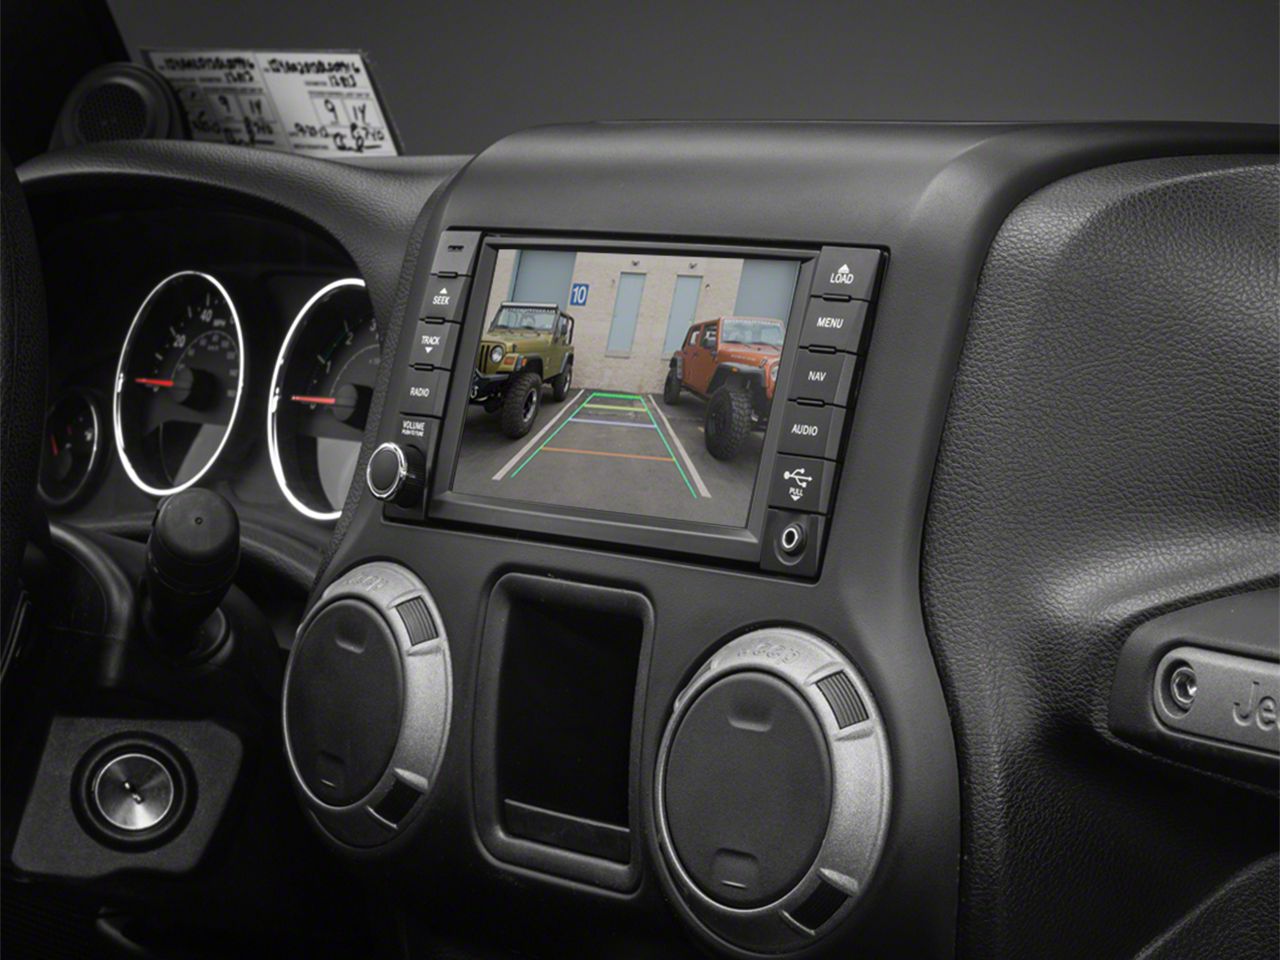 Jeep Navigation Systems for Wrangler | ExtremeTerrain